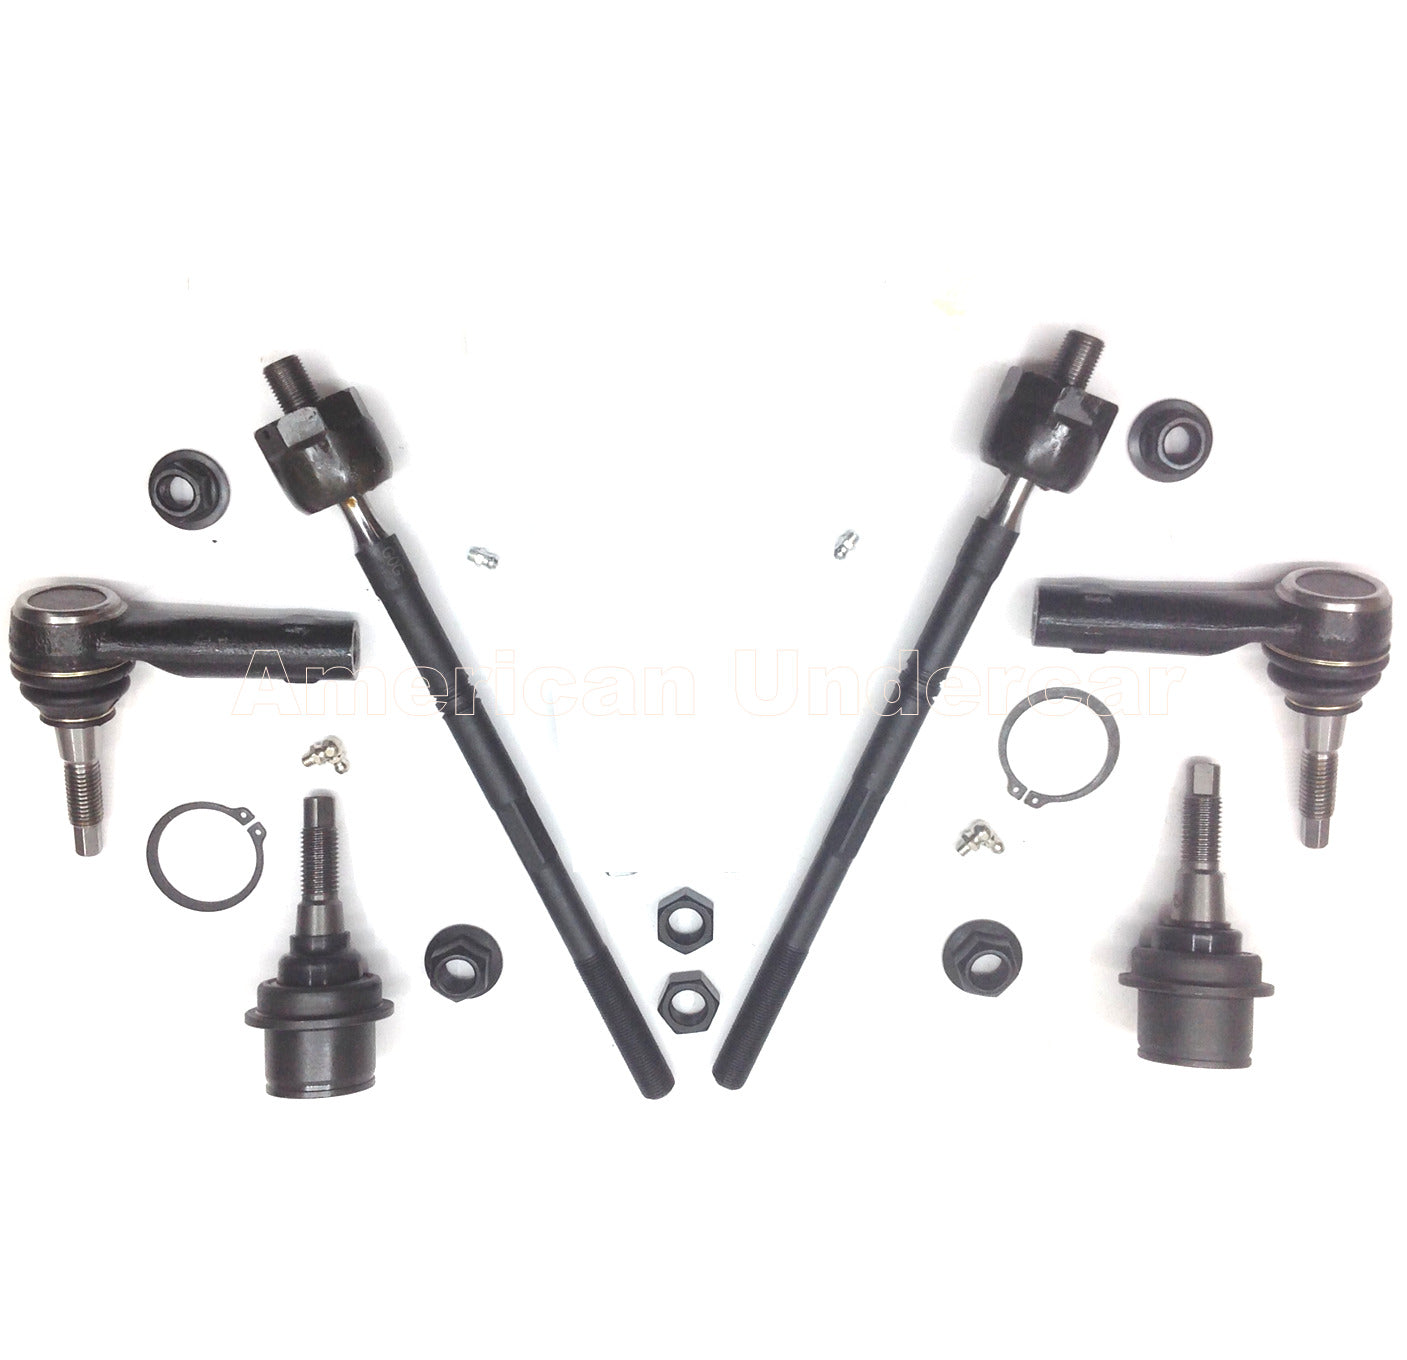 XRF Lower Ball Joints Tie Rod Ends Steering Kit for 2003-2006 Ford Expedition 2WD